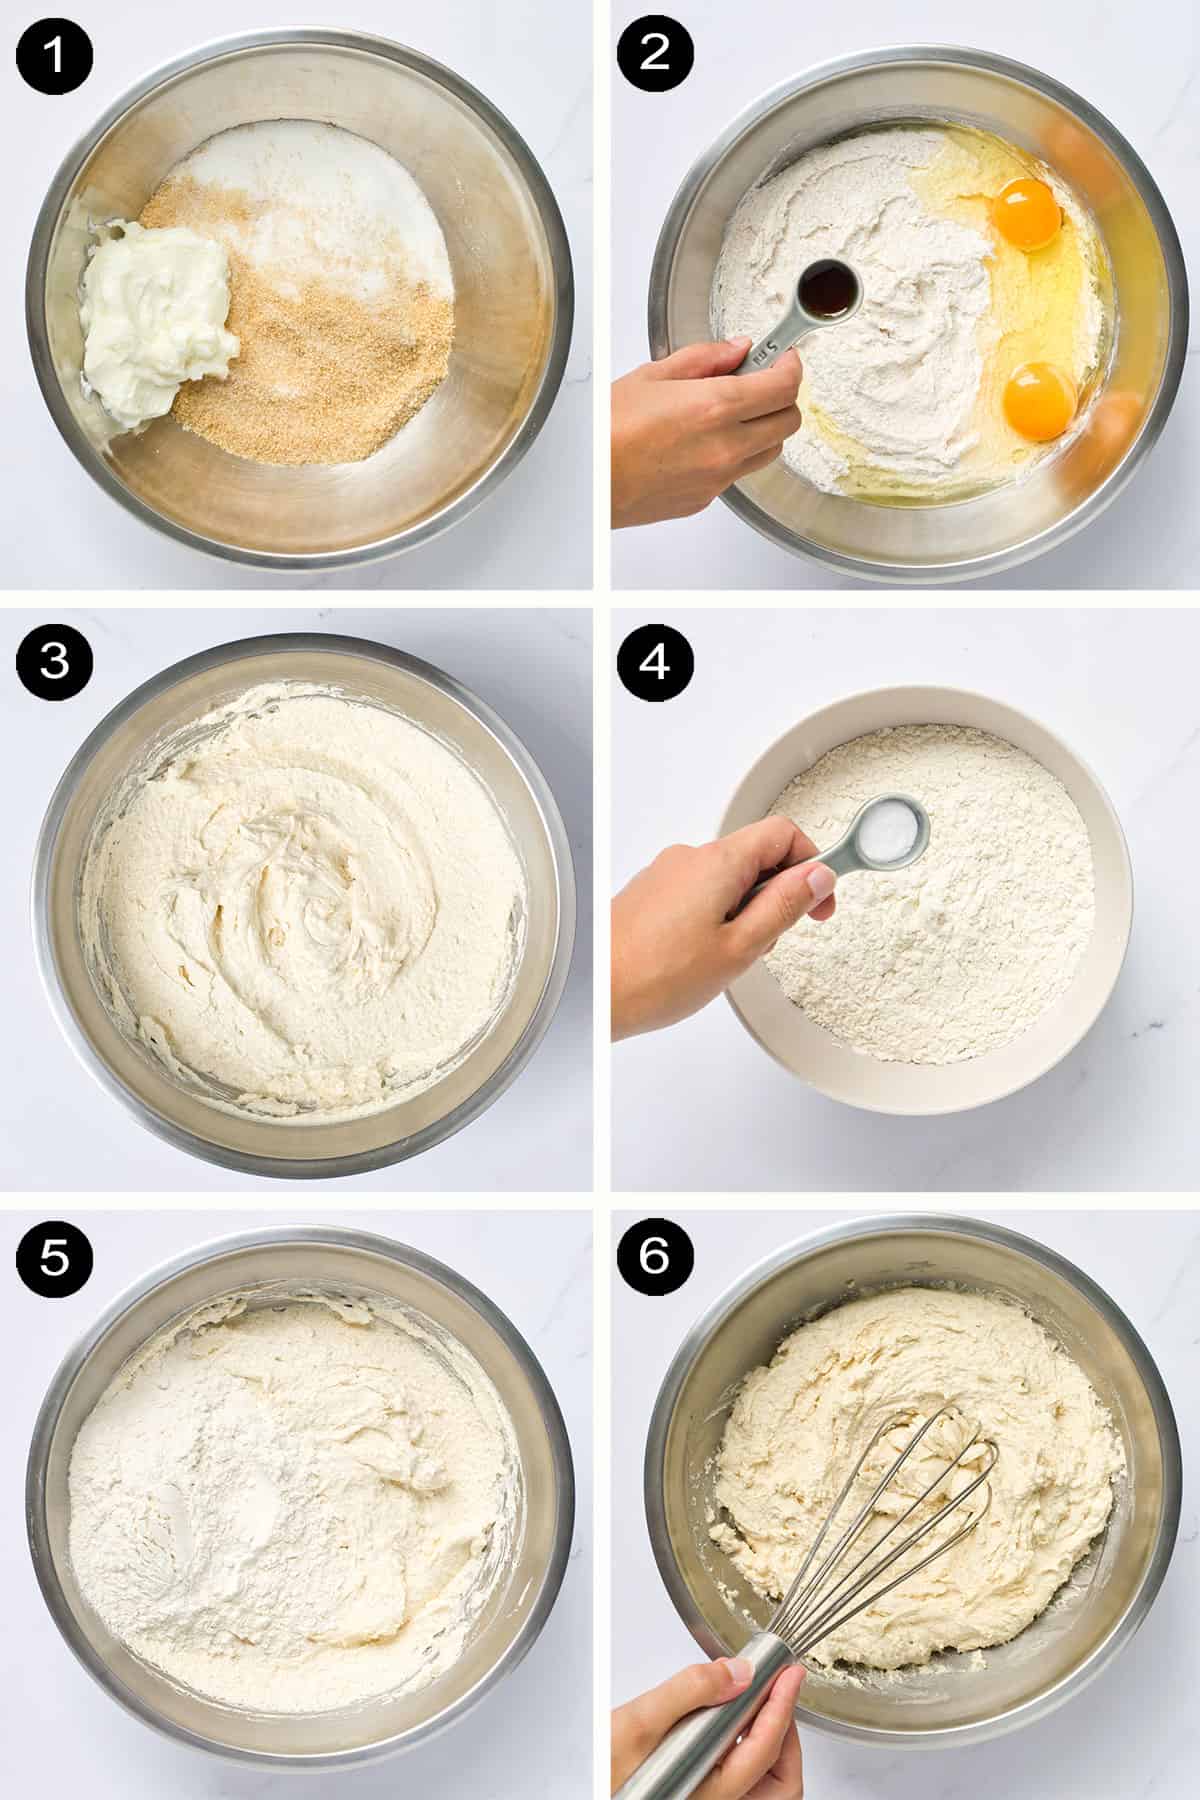 Steps 1-6 to make cereal cookies.